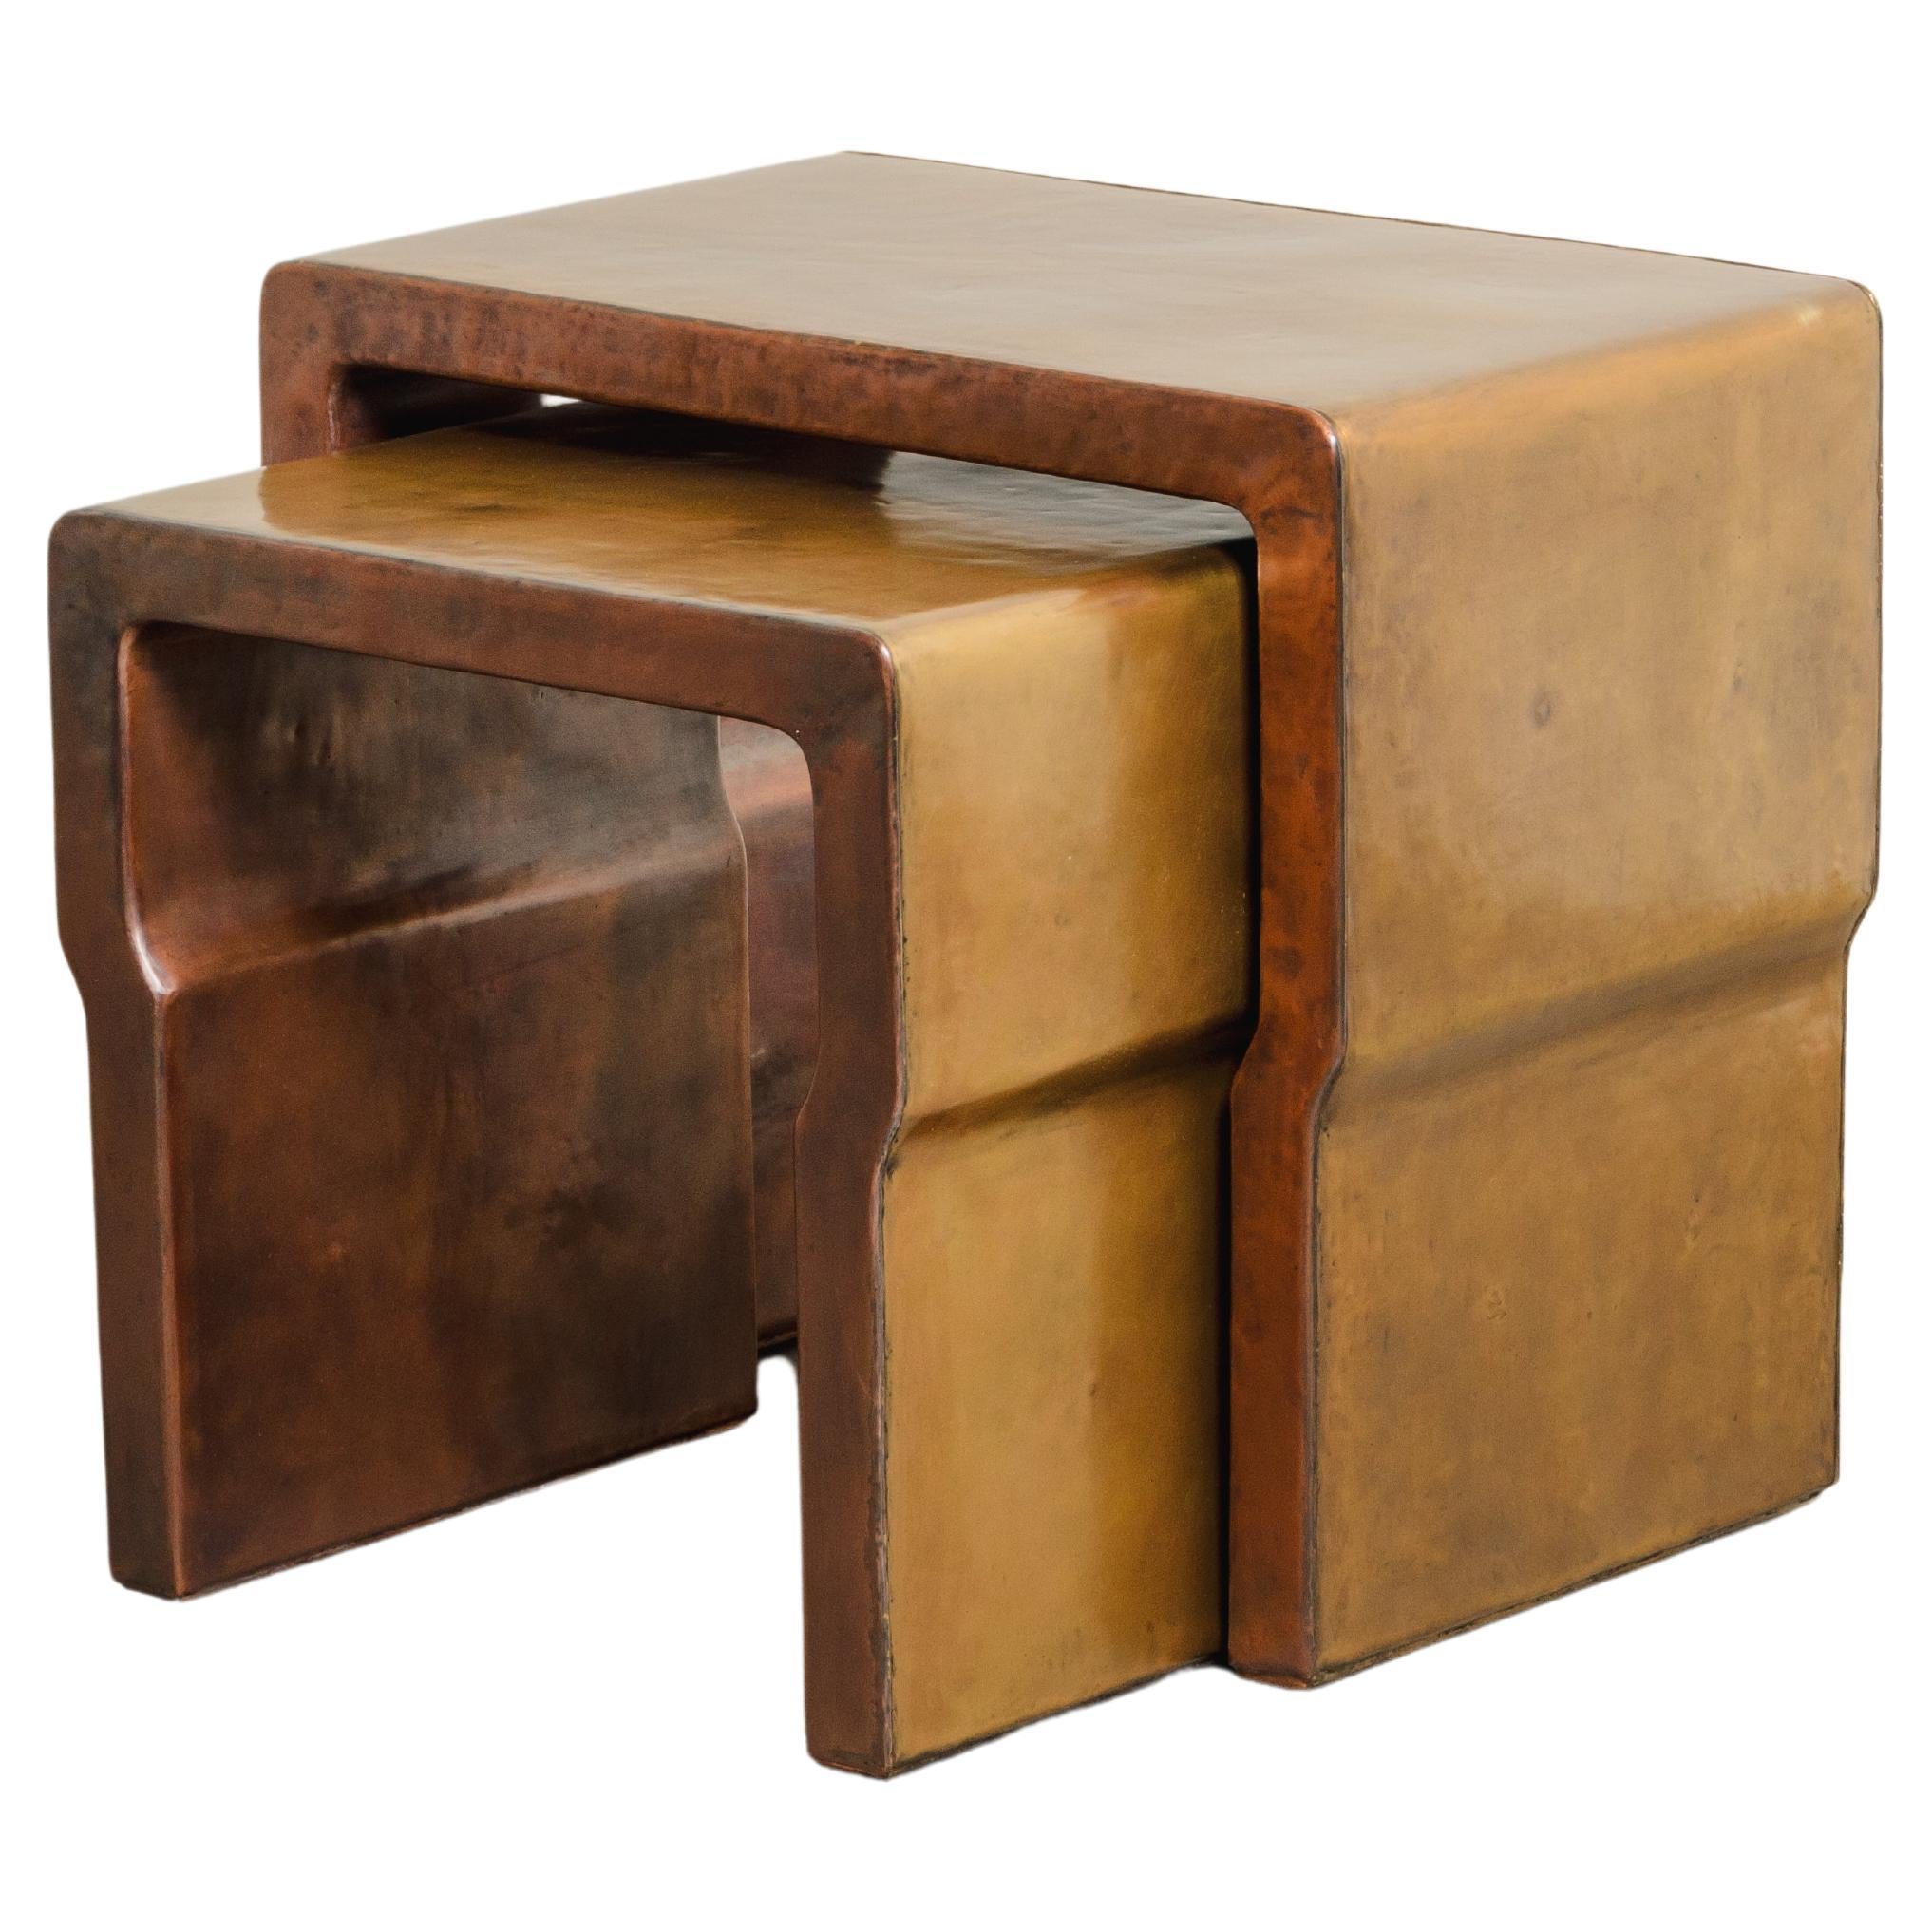 Cintura Nesting Tables (Set of 2) in Brass and Copper by Robert Kuo, Limited